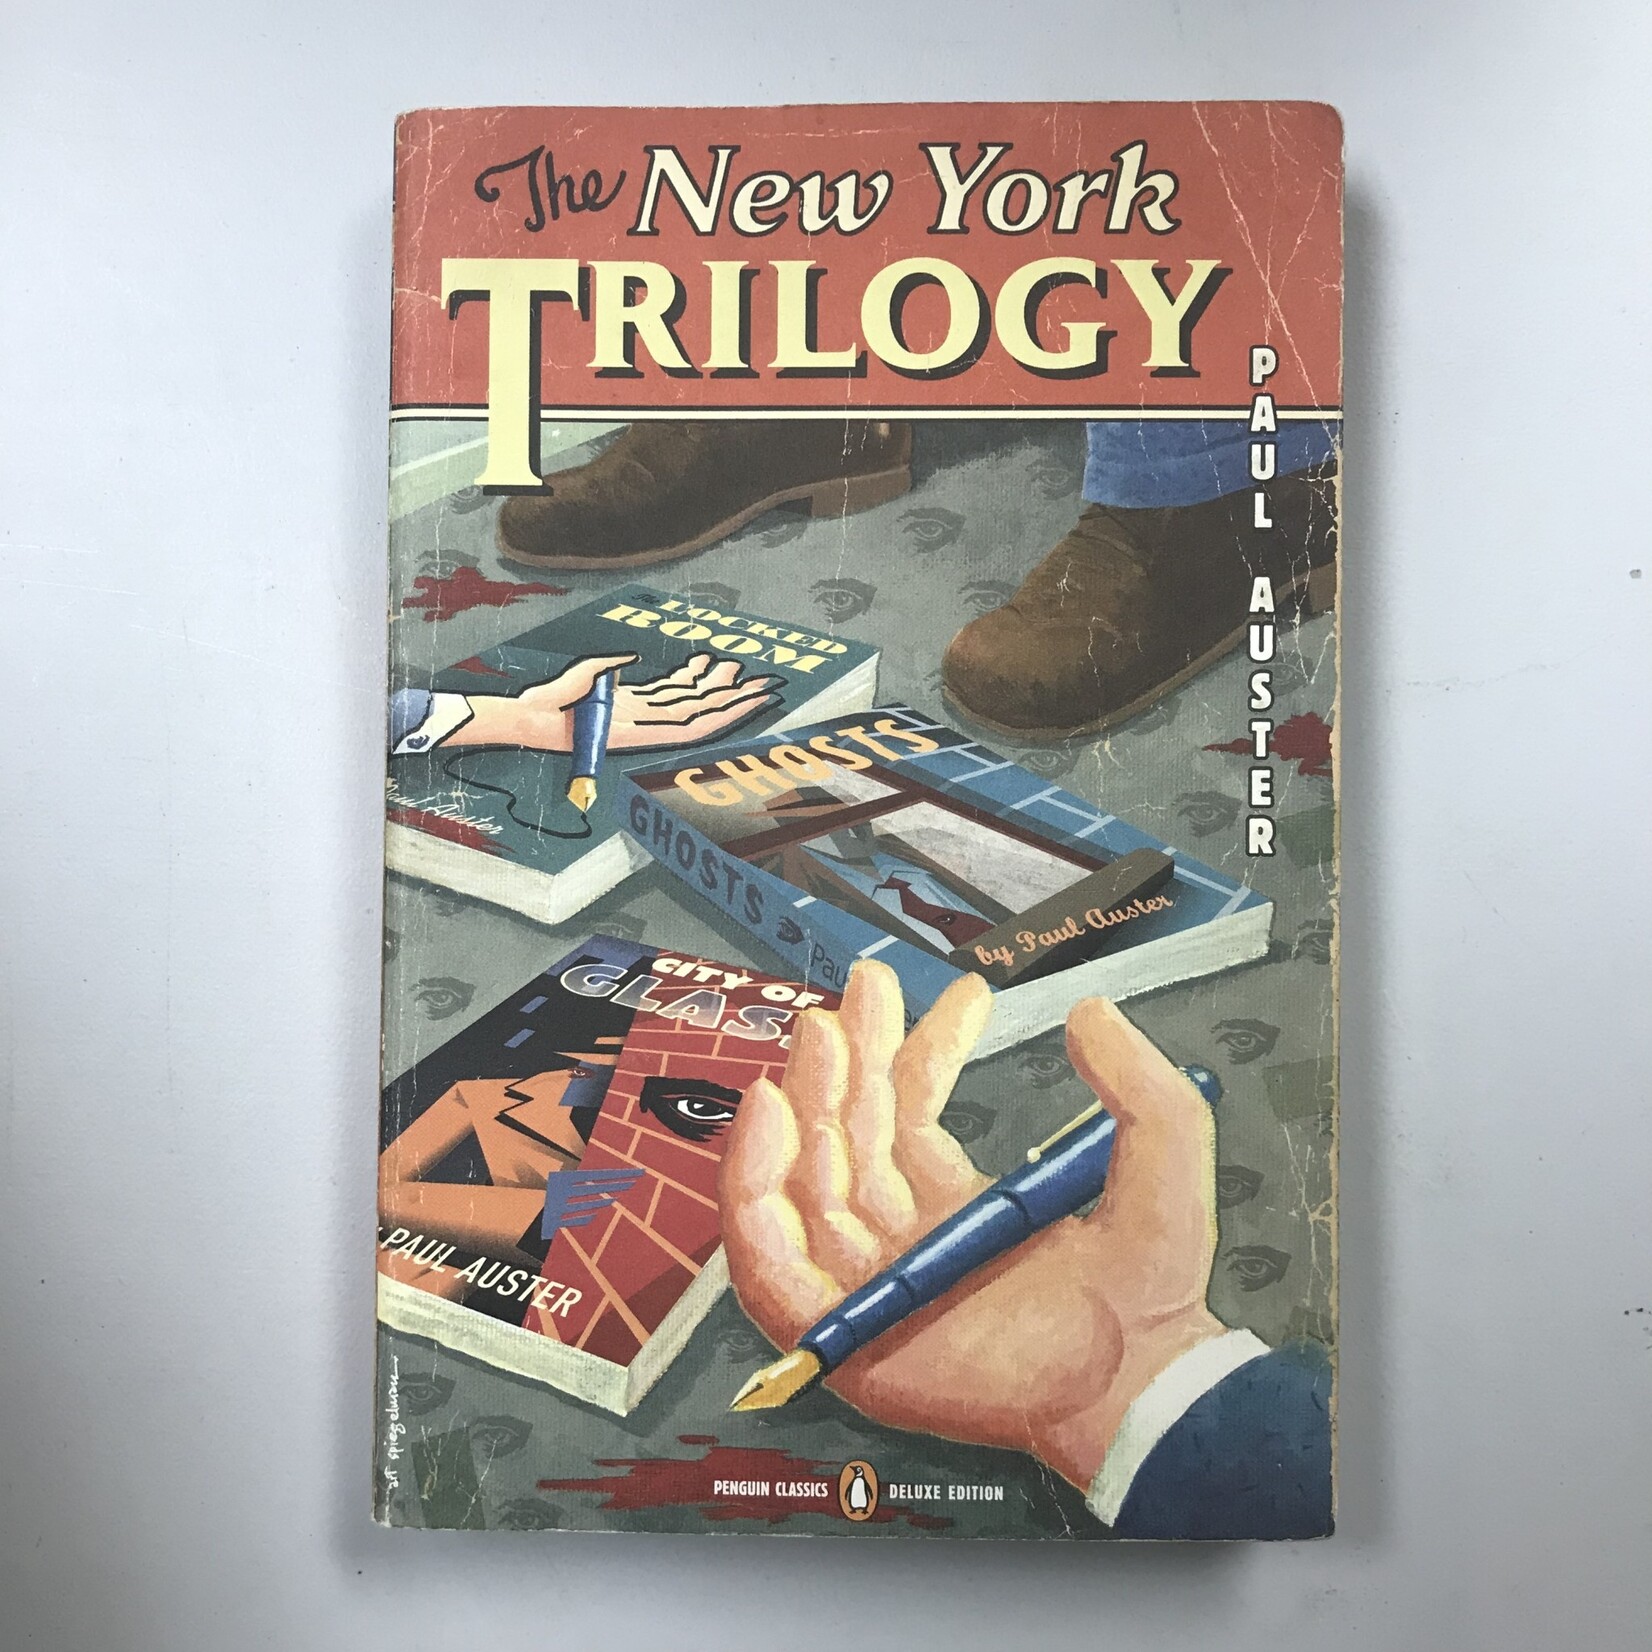 Paul Auster - The New York Trilogy - Paperback (USED)